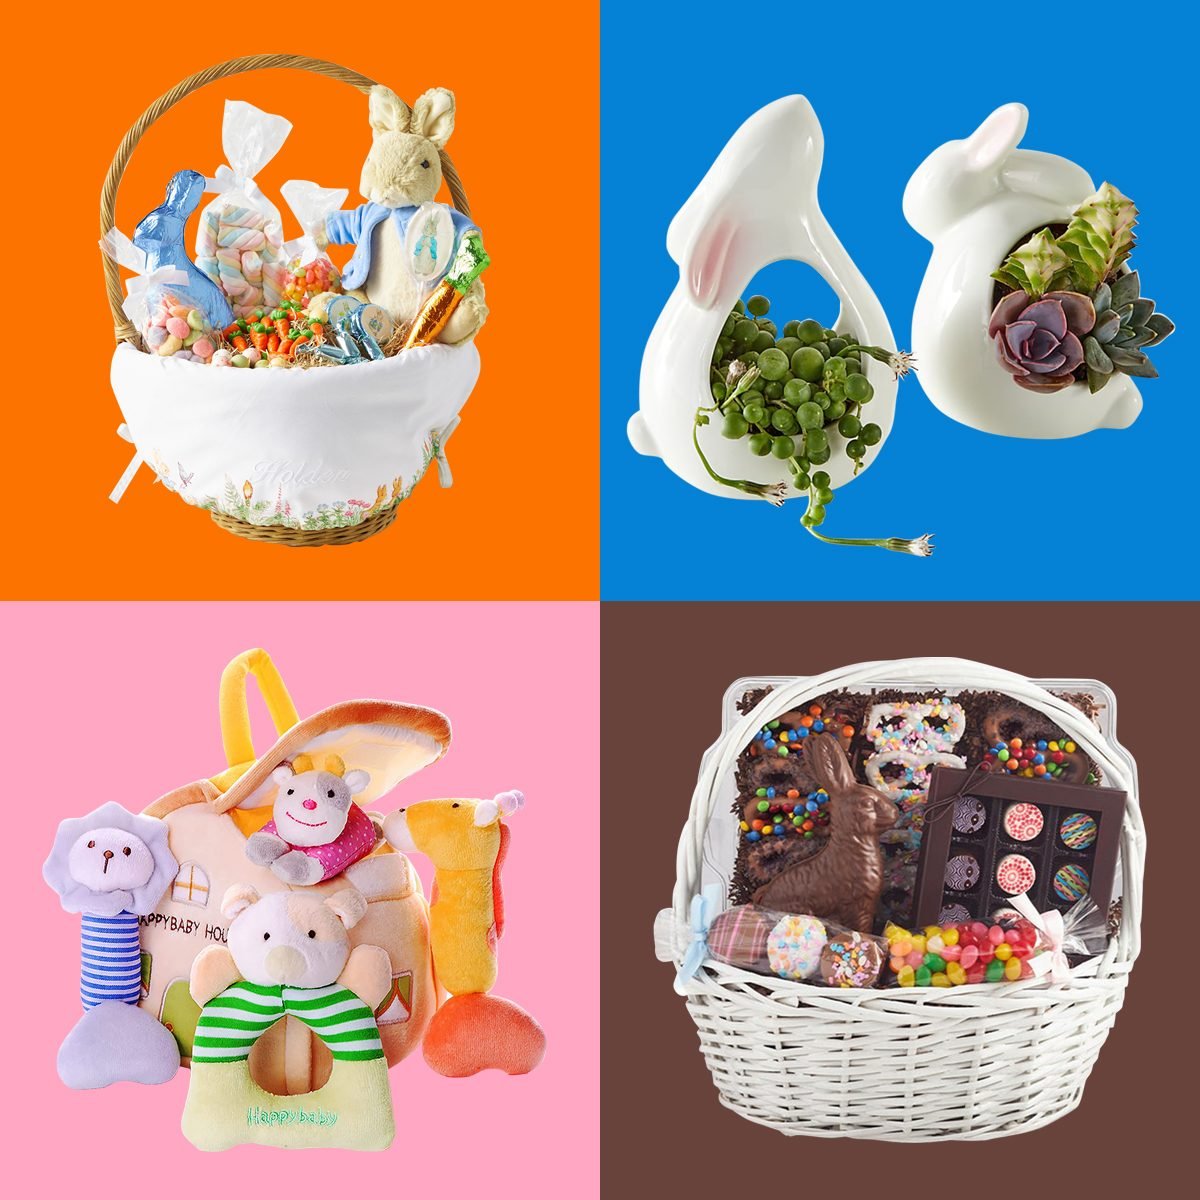 https://www.rd.com/wp-content/uploads/2023/03/17-Best-Premade-Easter-Baskets-for-Everyone-in-the-Family_FT_via-amazon.com_.jpg